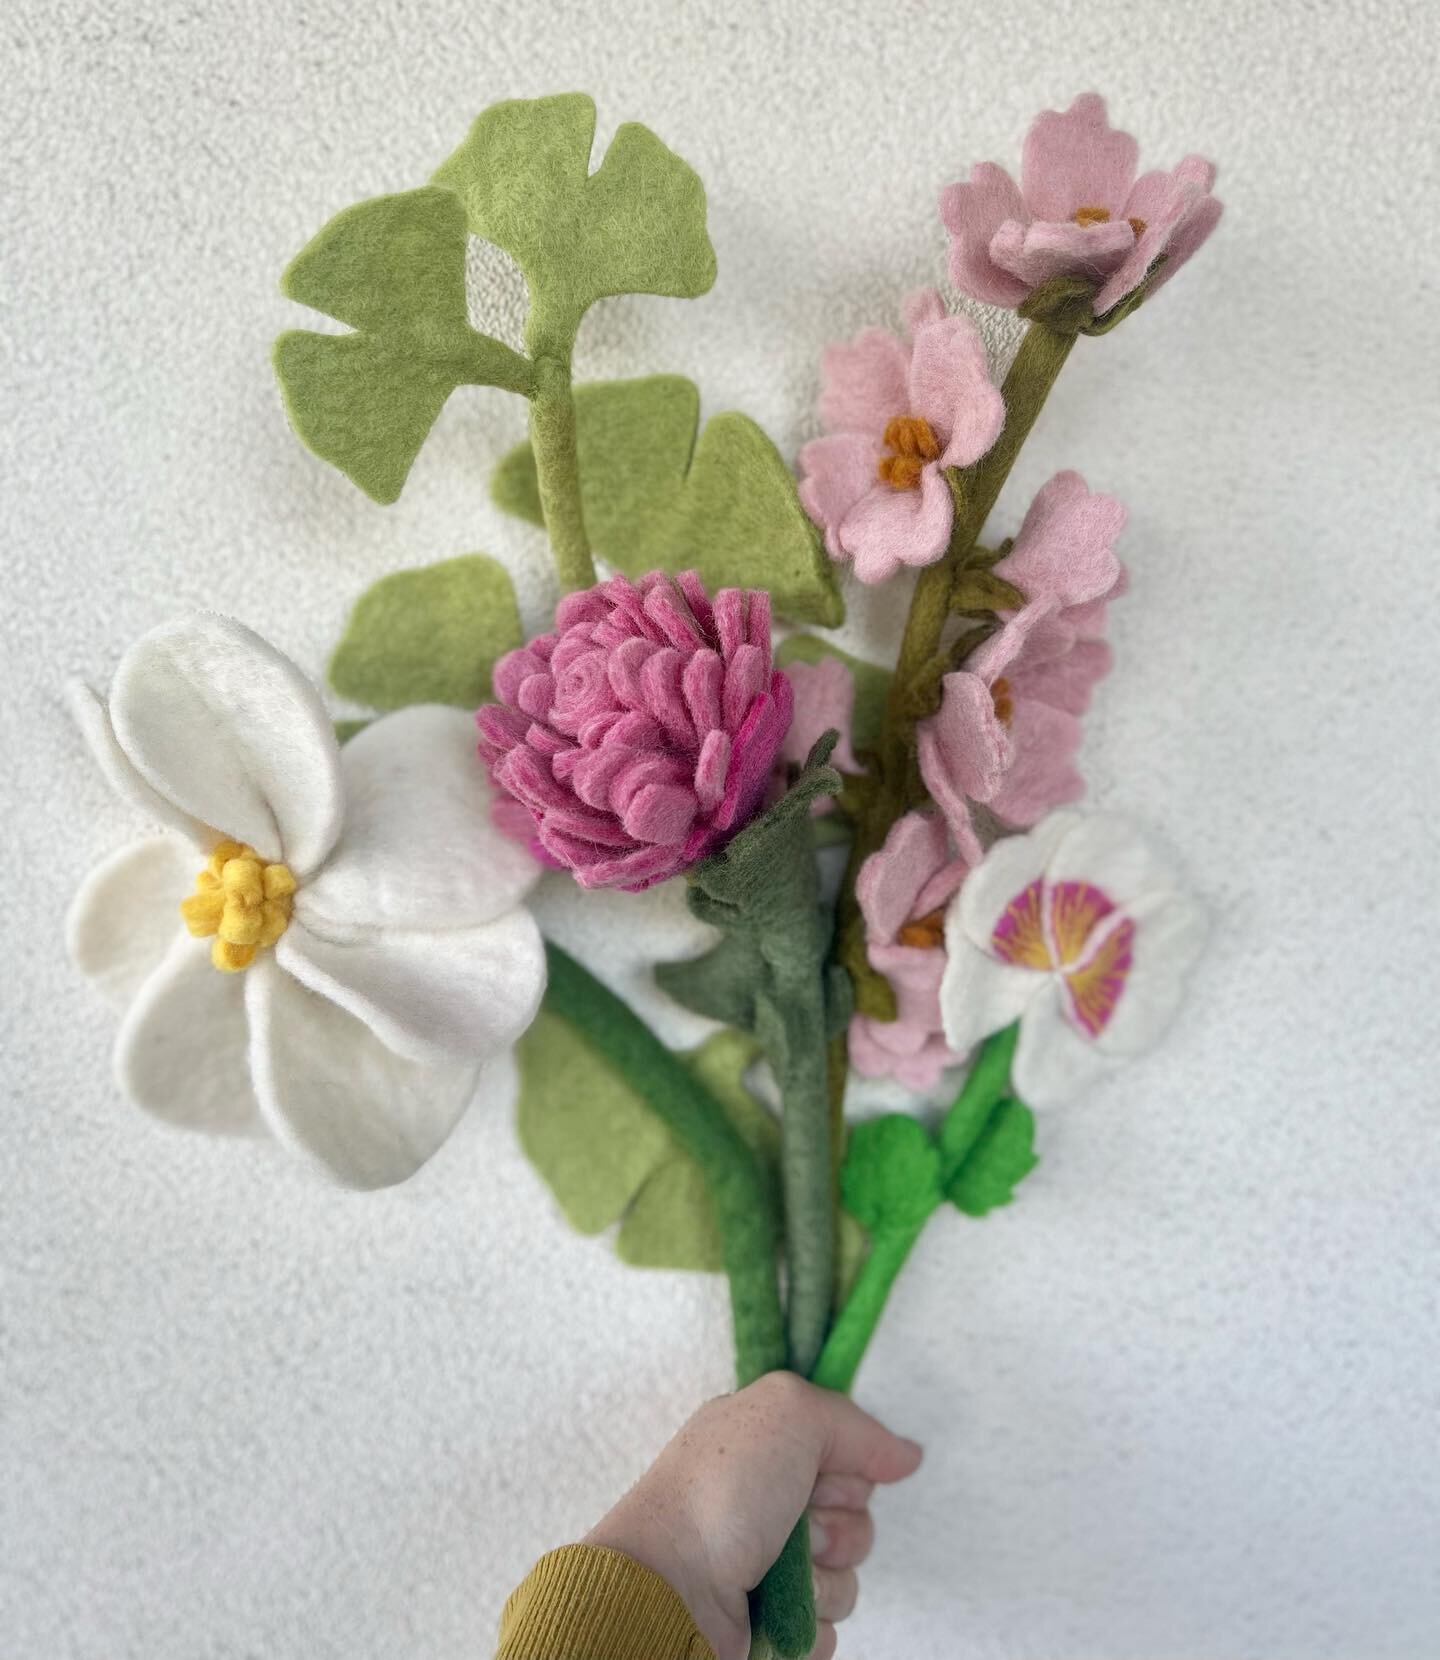 Pretty in pink with cherry blossoms, chrysanthemum, pansy, magnolia, and ginkgo leaves. #thesparrowstudio #feltflowers #magnolia #cherryblossom #ginkgo #pansy